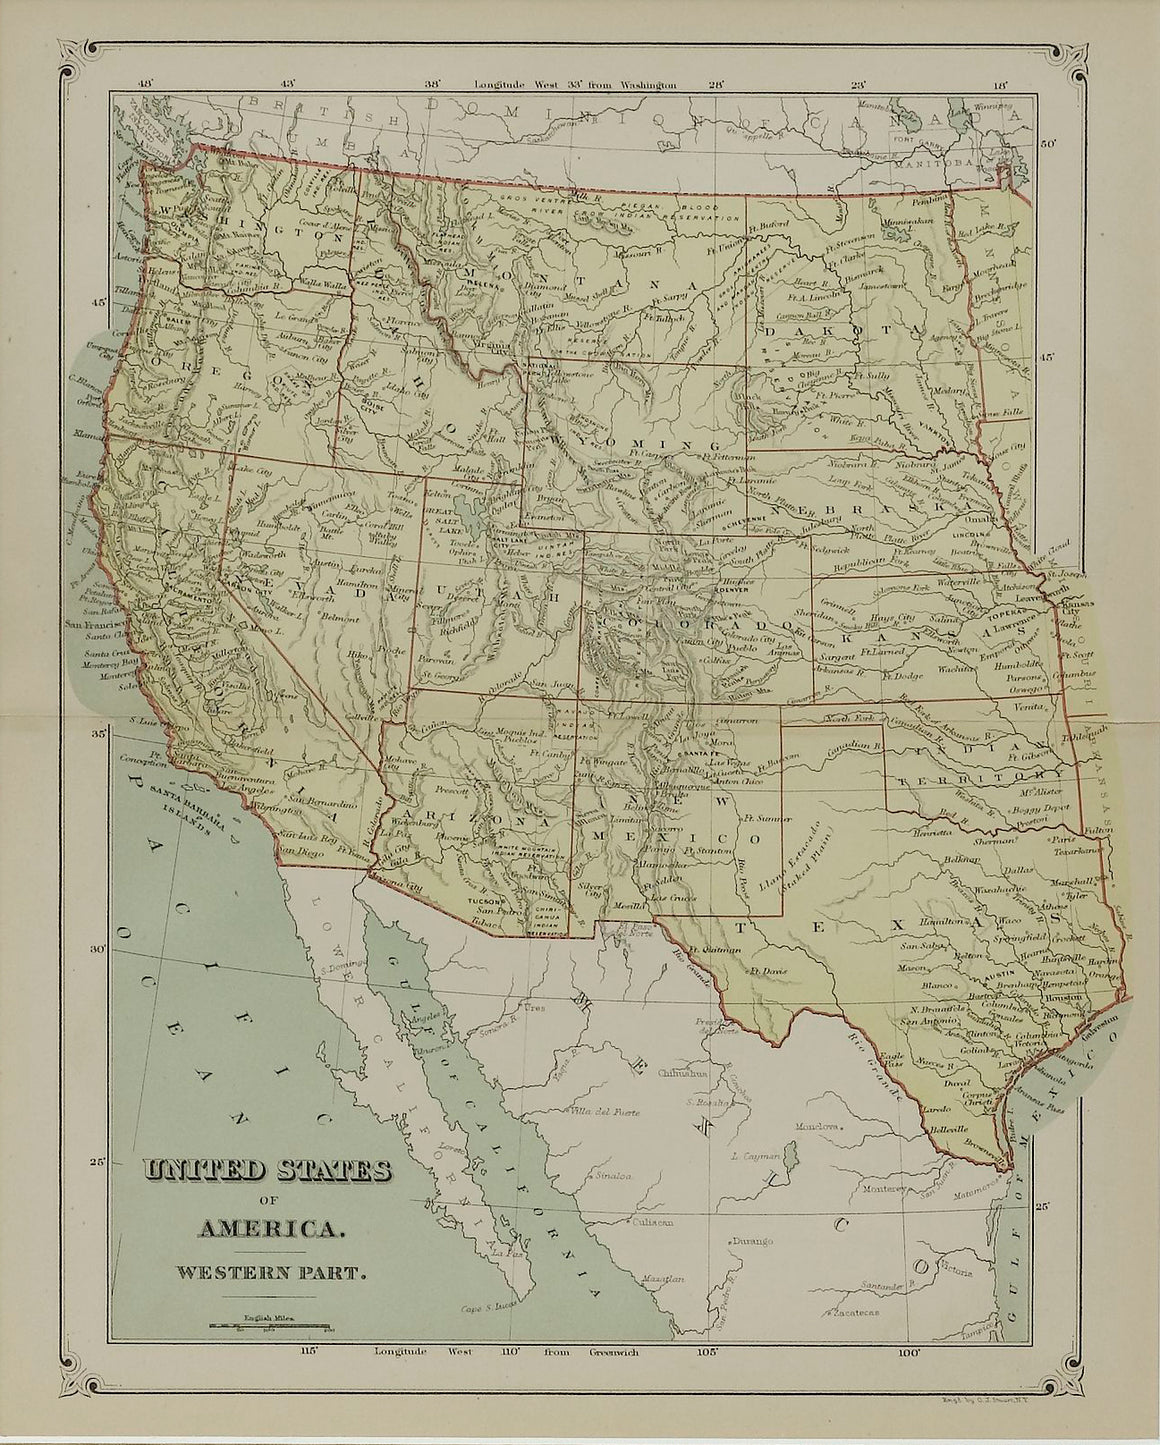 1879 "United States of America, Western Part" by O. J. Stuart